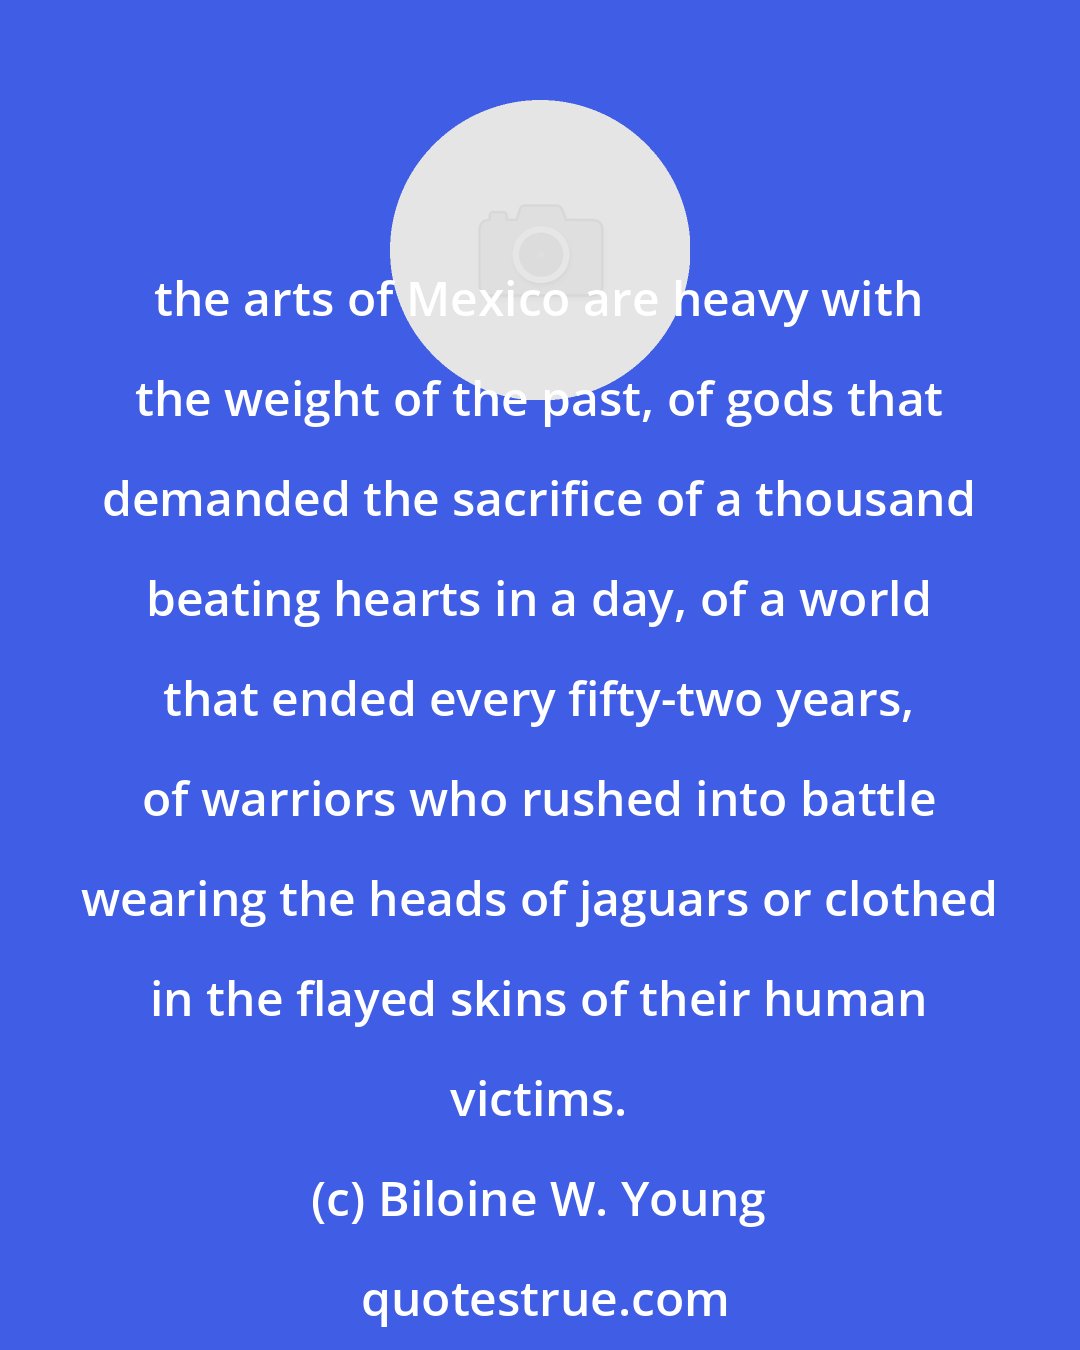 Biloine W. Young: the arts of Mexico are heavy with the weight of the past, of gods that demanded the sacrifice of a thousand beating hearts in a day, of a world that ended every fifty-two years, of warriors who rushed into battle wearing the heads of jaguars or clothed in the flayed skins of their human victims.